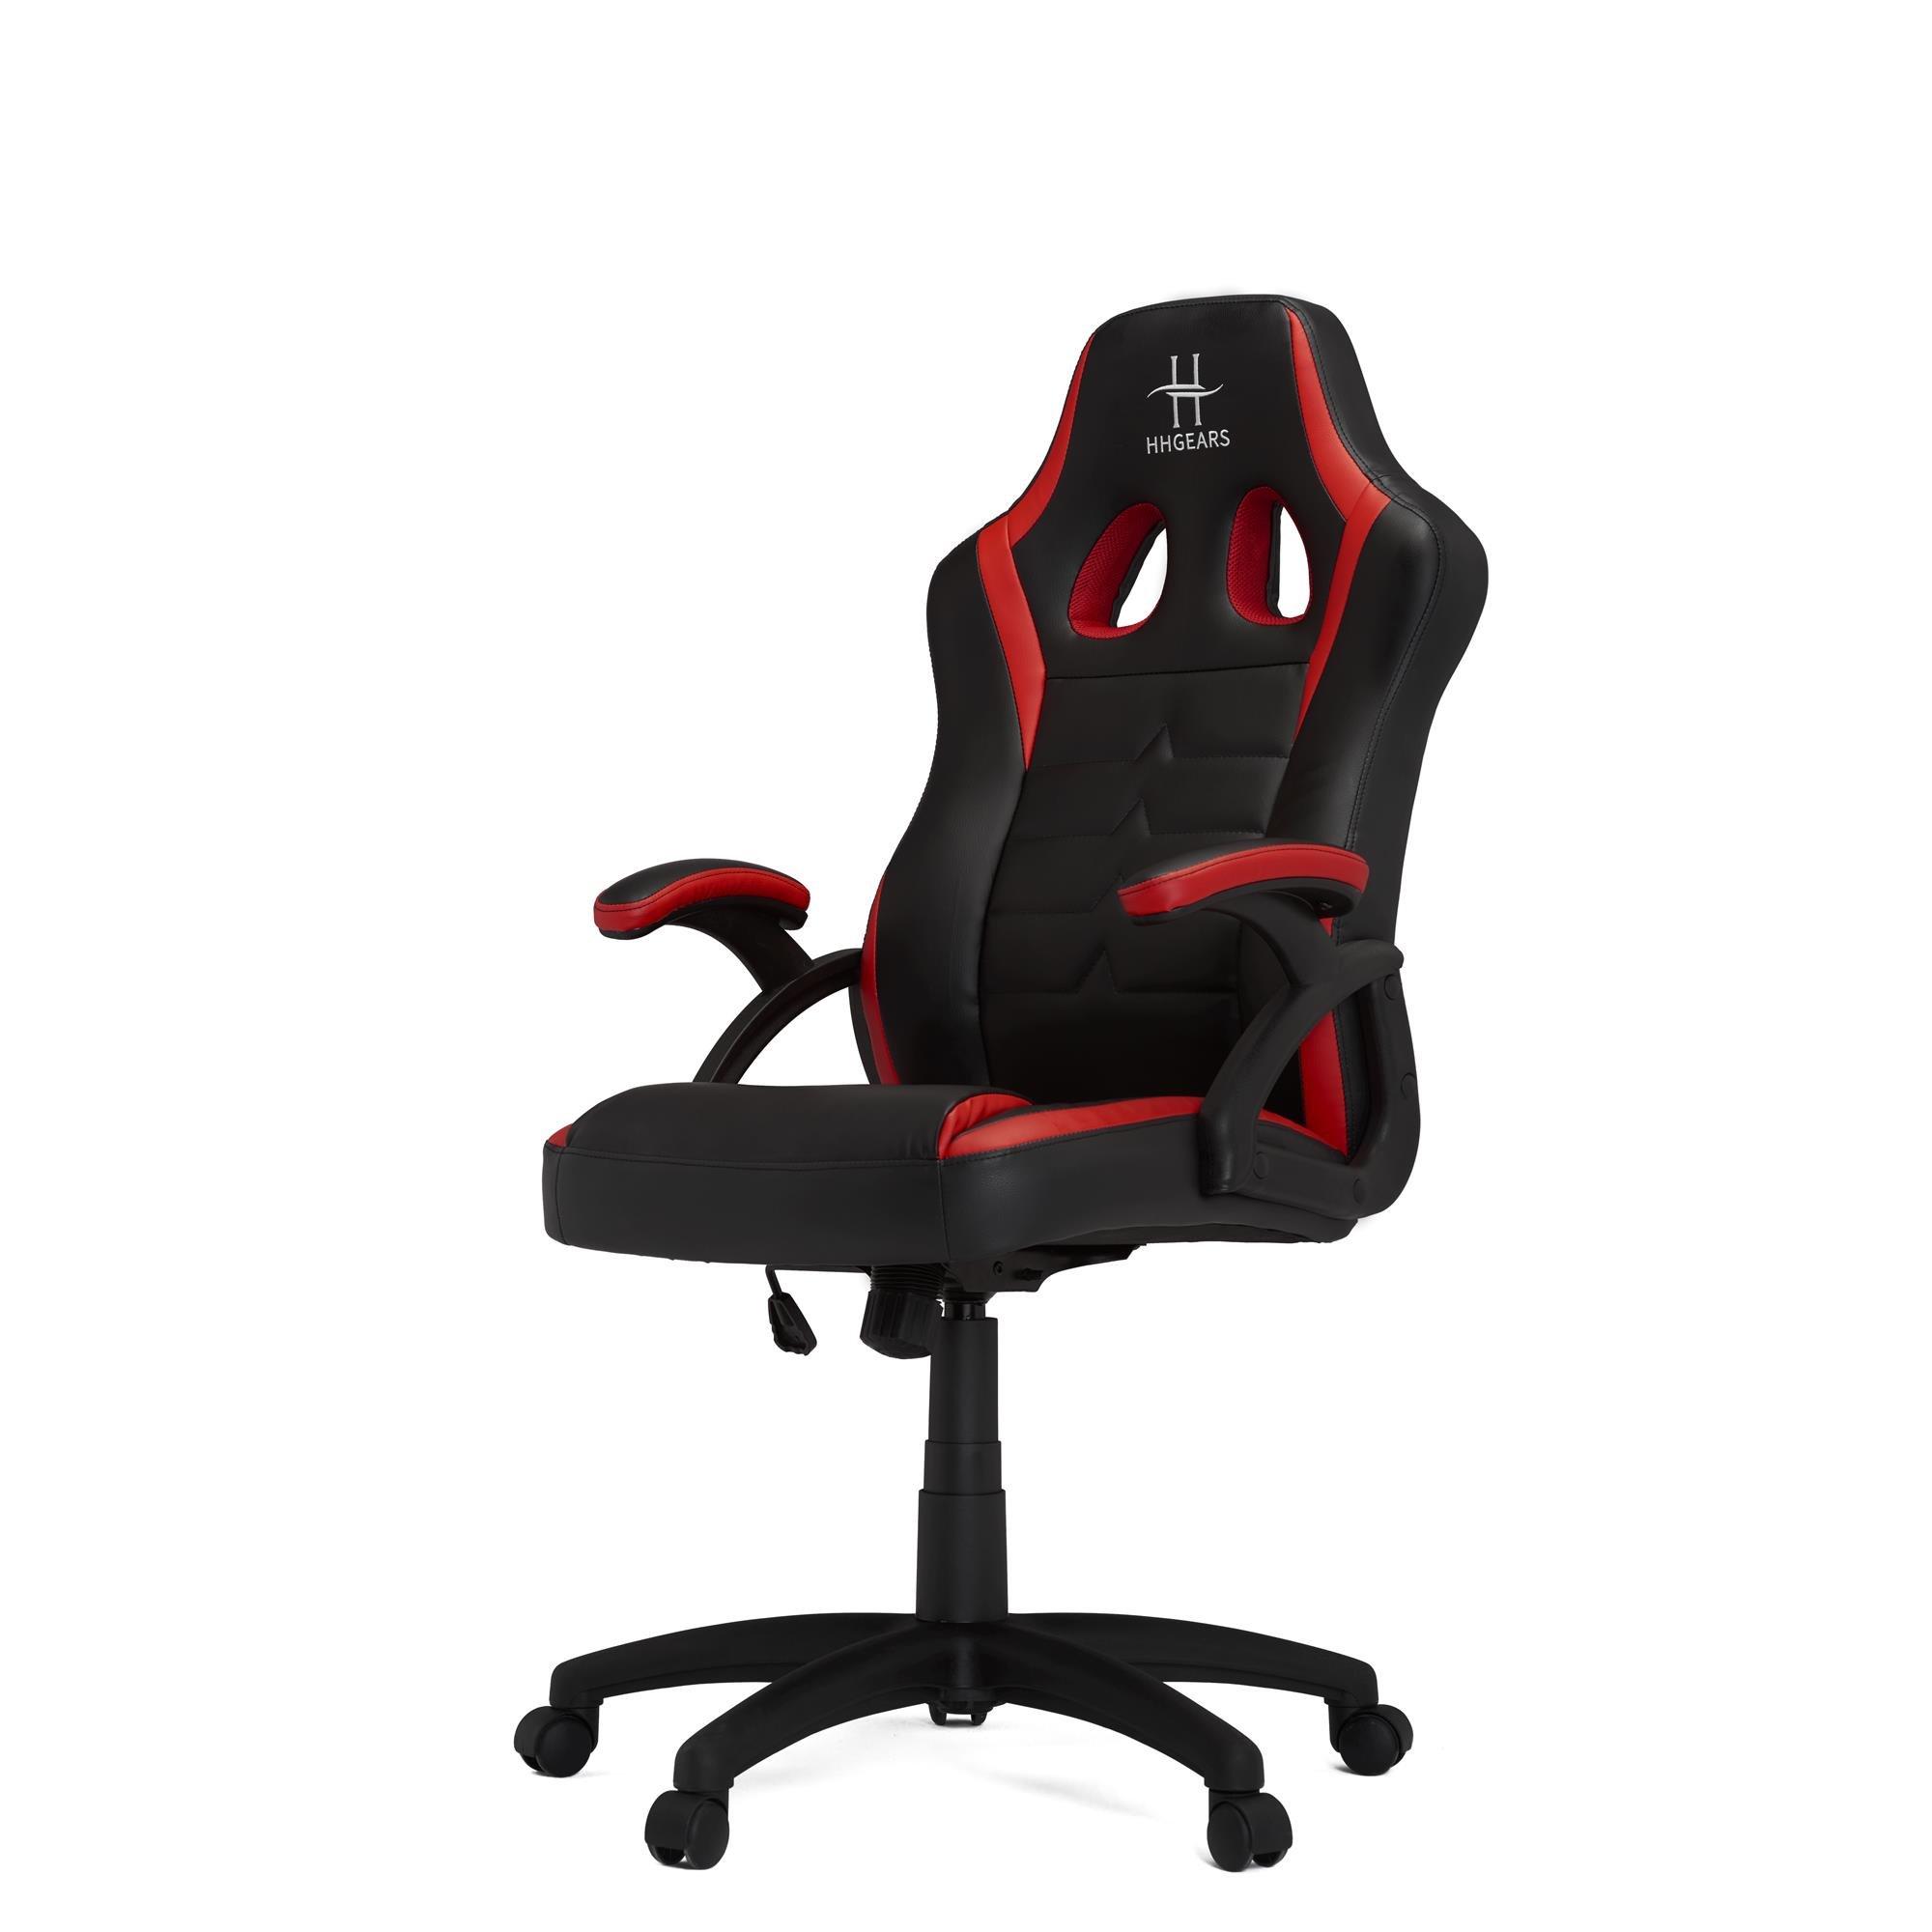 SM115 Black and Red Gaming Chair GameStop